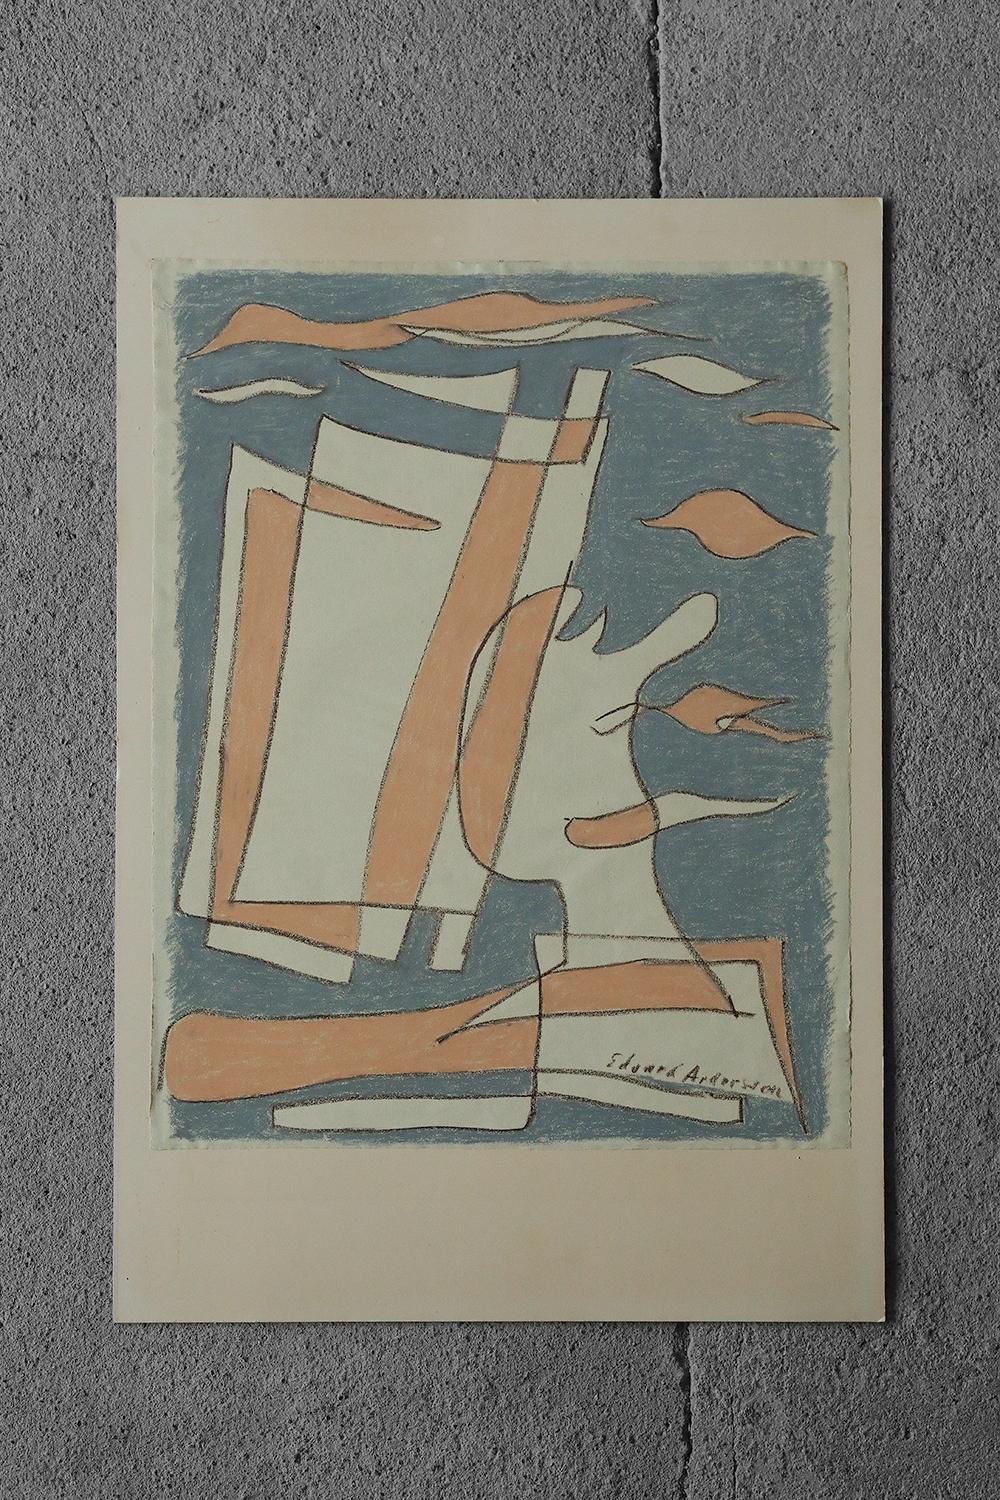 Scandinavian Modern Pastel drawing by Edvard Andersson, Komposition For Sale